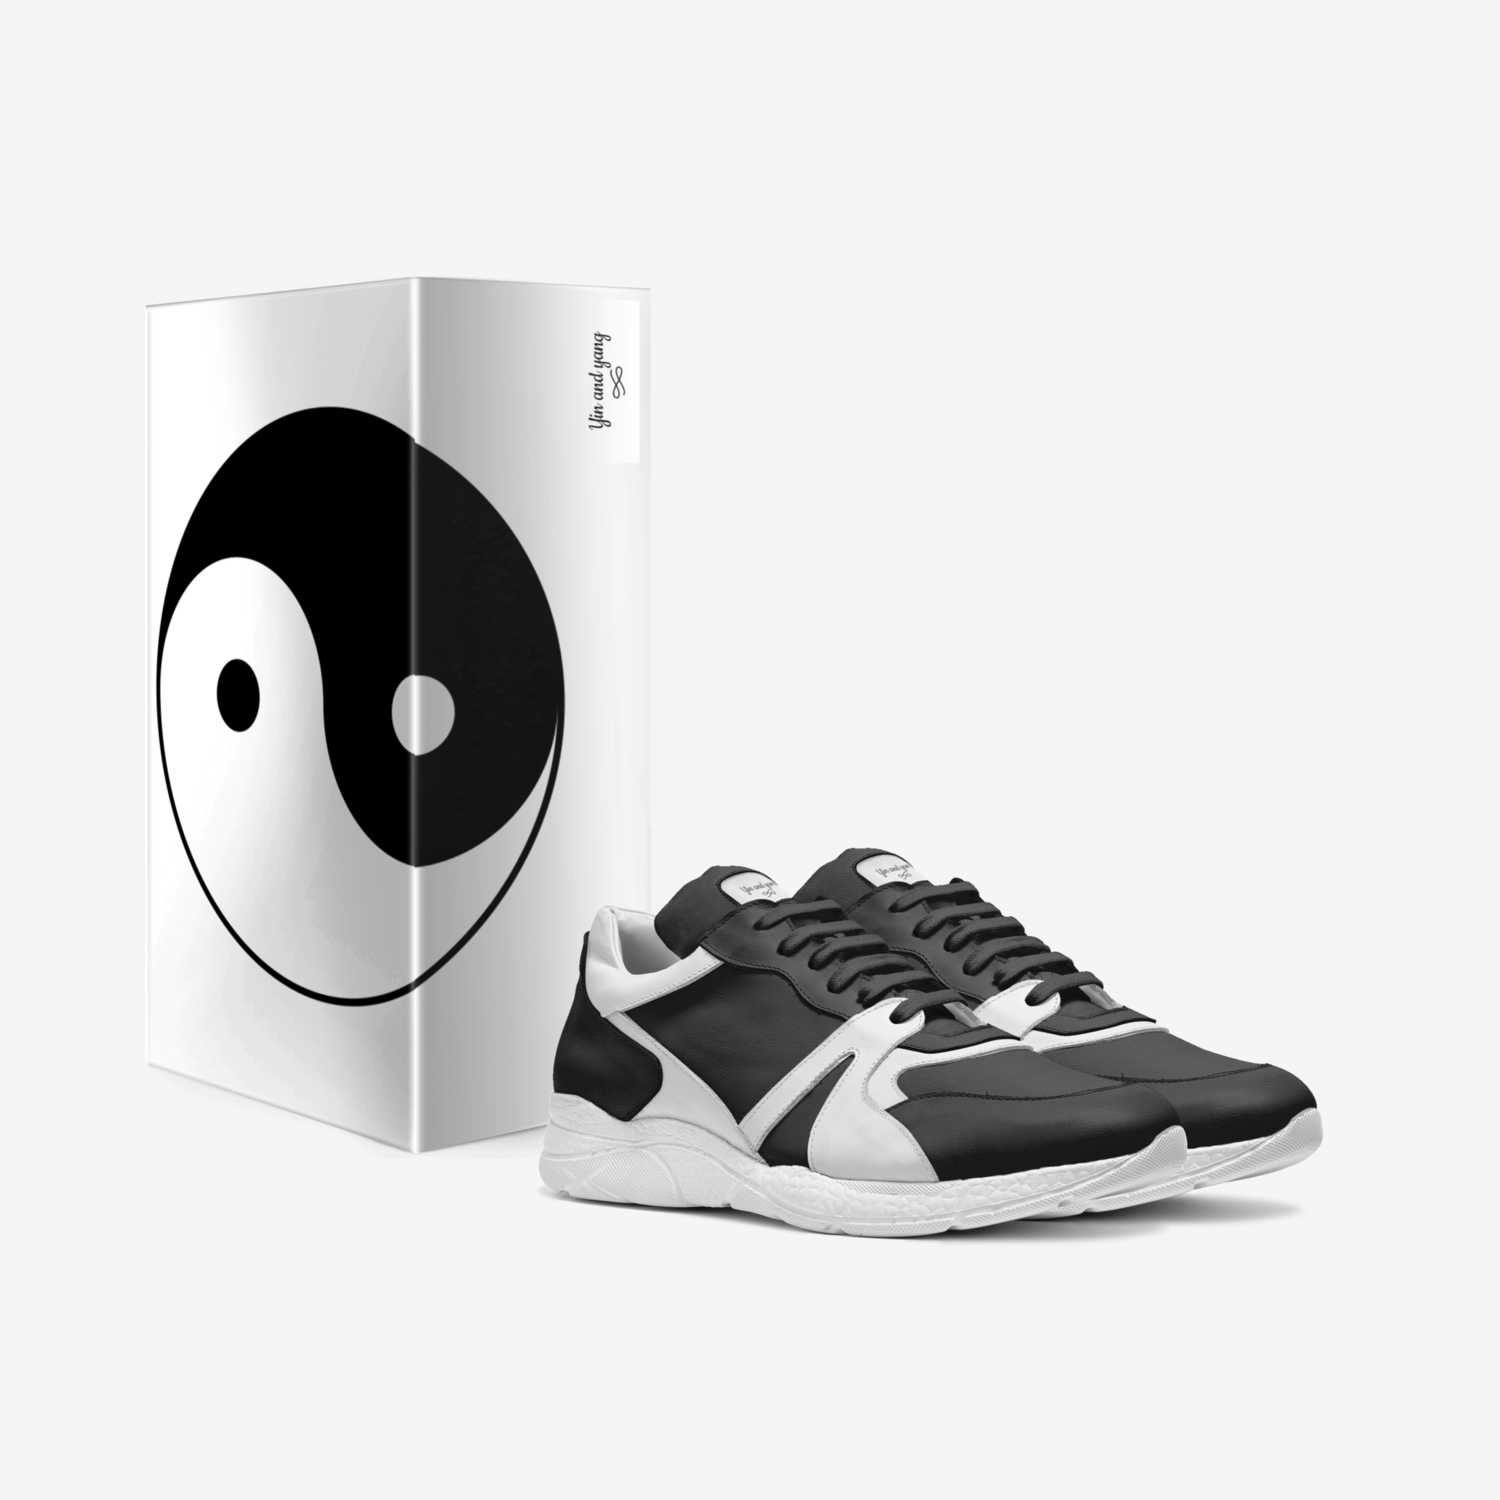 Yin and yang custom made in Italy shoes by Anthony Woisin | Box view